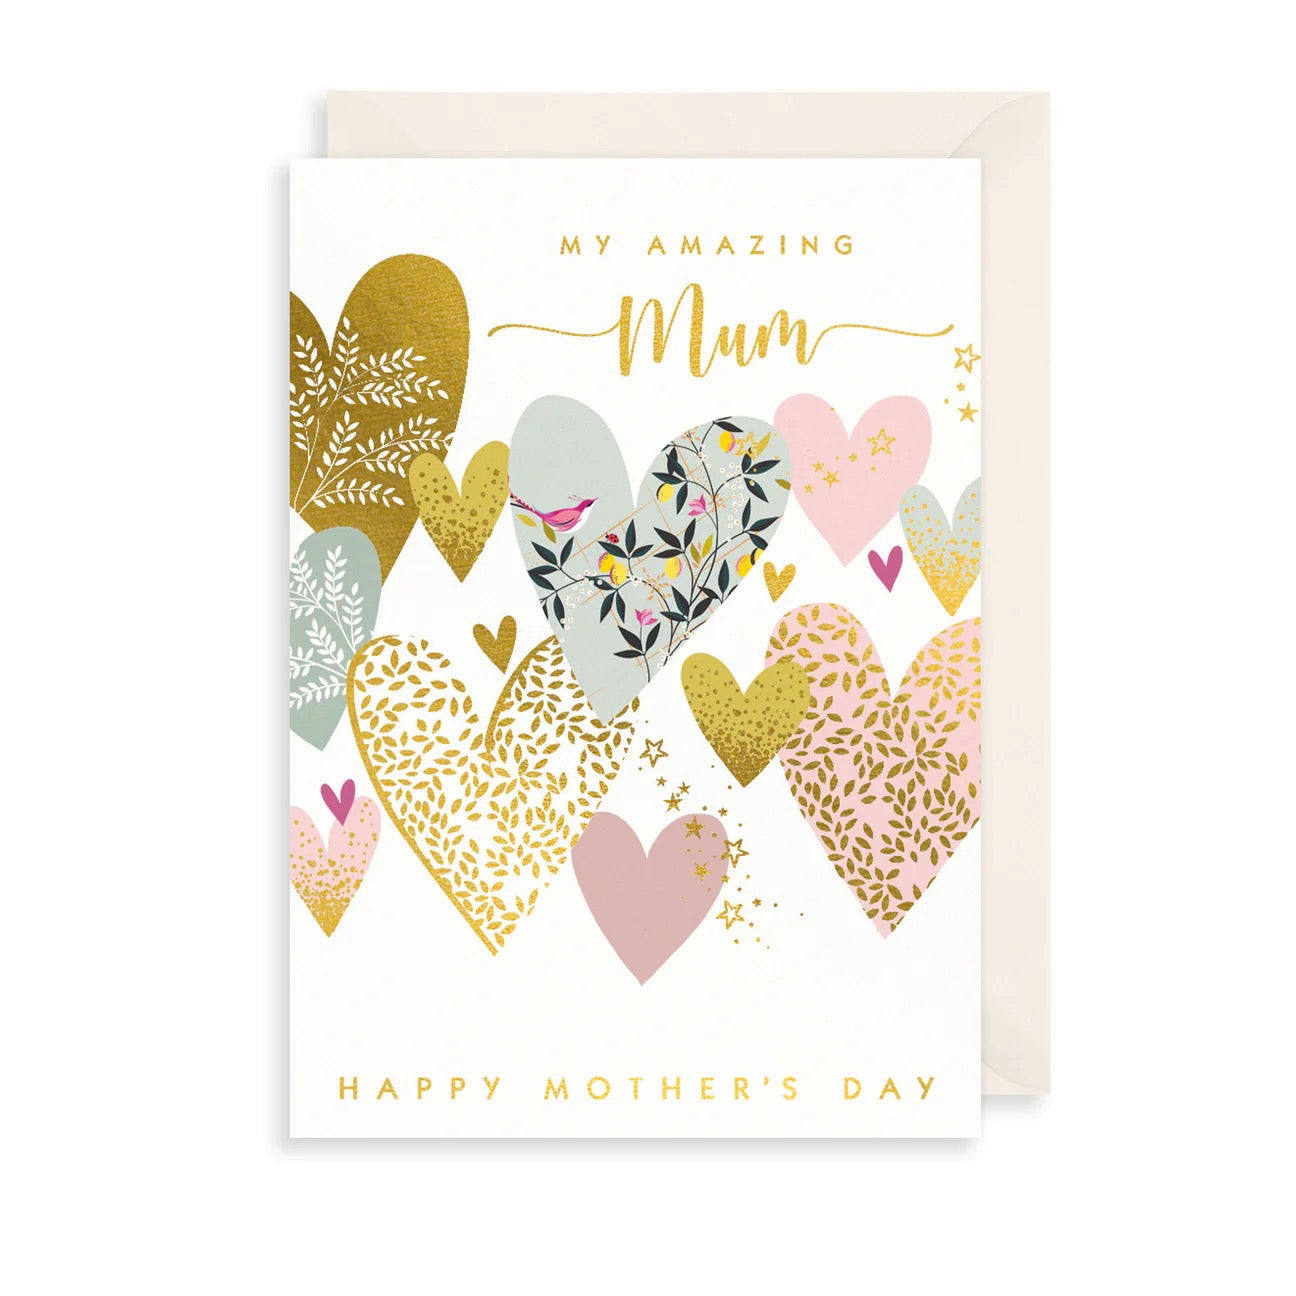 Sara Miller by The Art File - Amazing Mum Hearts Mother's Day Card